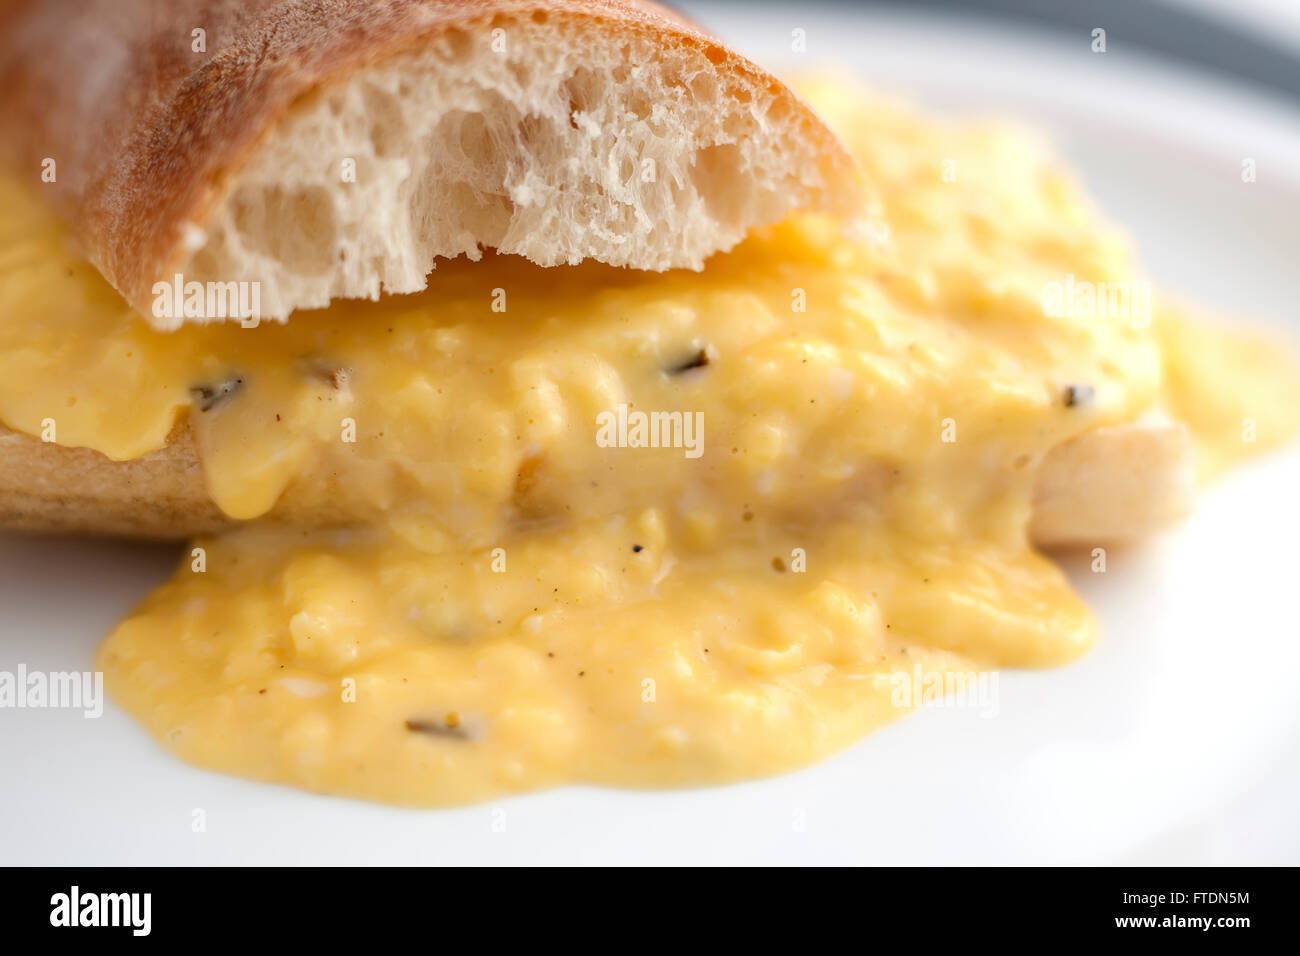 Creamy scrambled eggs with bread in French style. Stock Photo